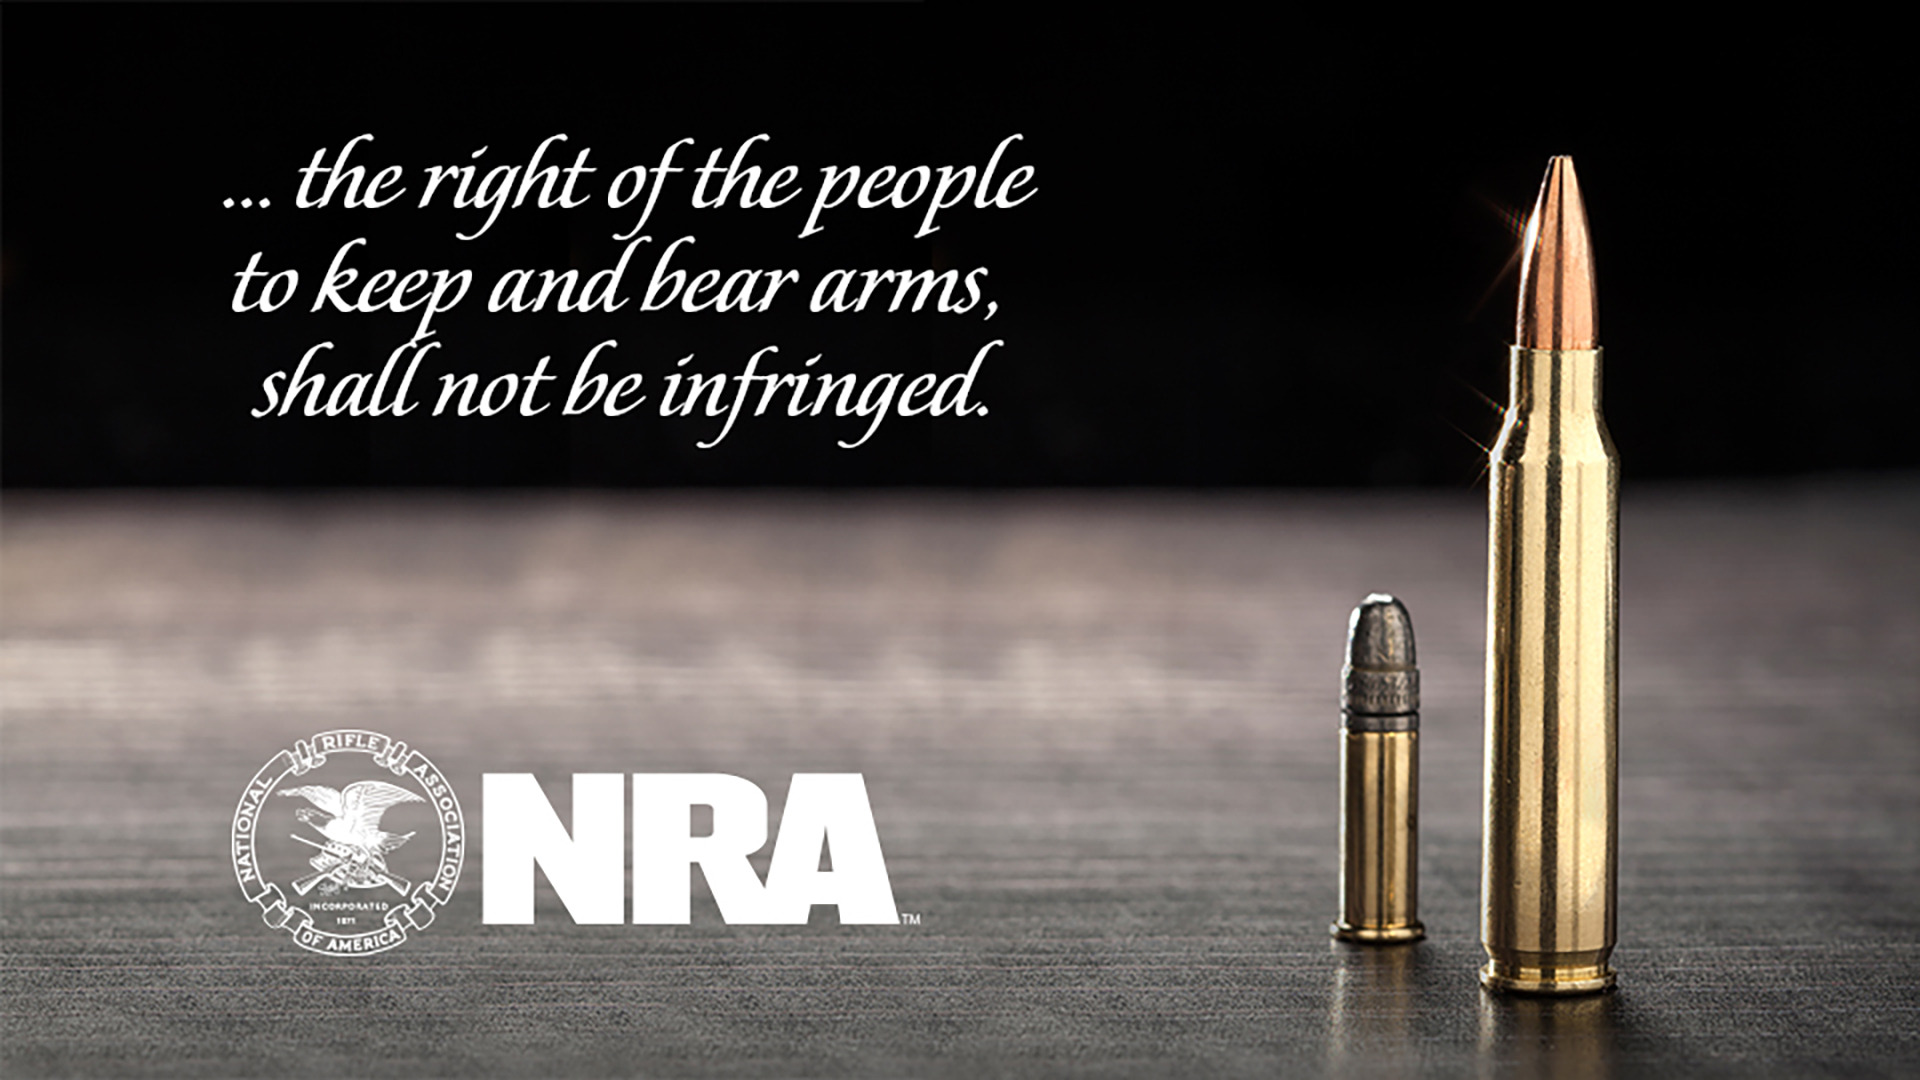 Nra Backgrounds - HD Wallpaper 